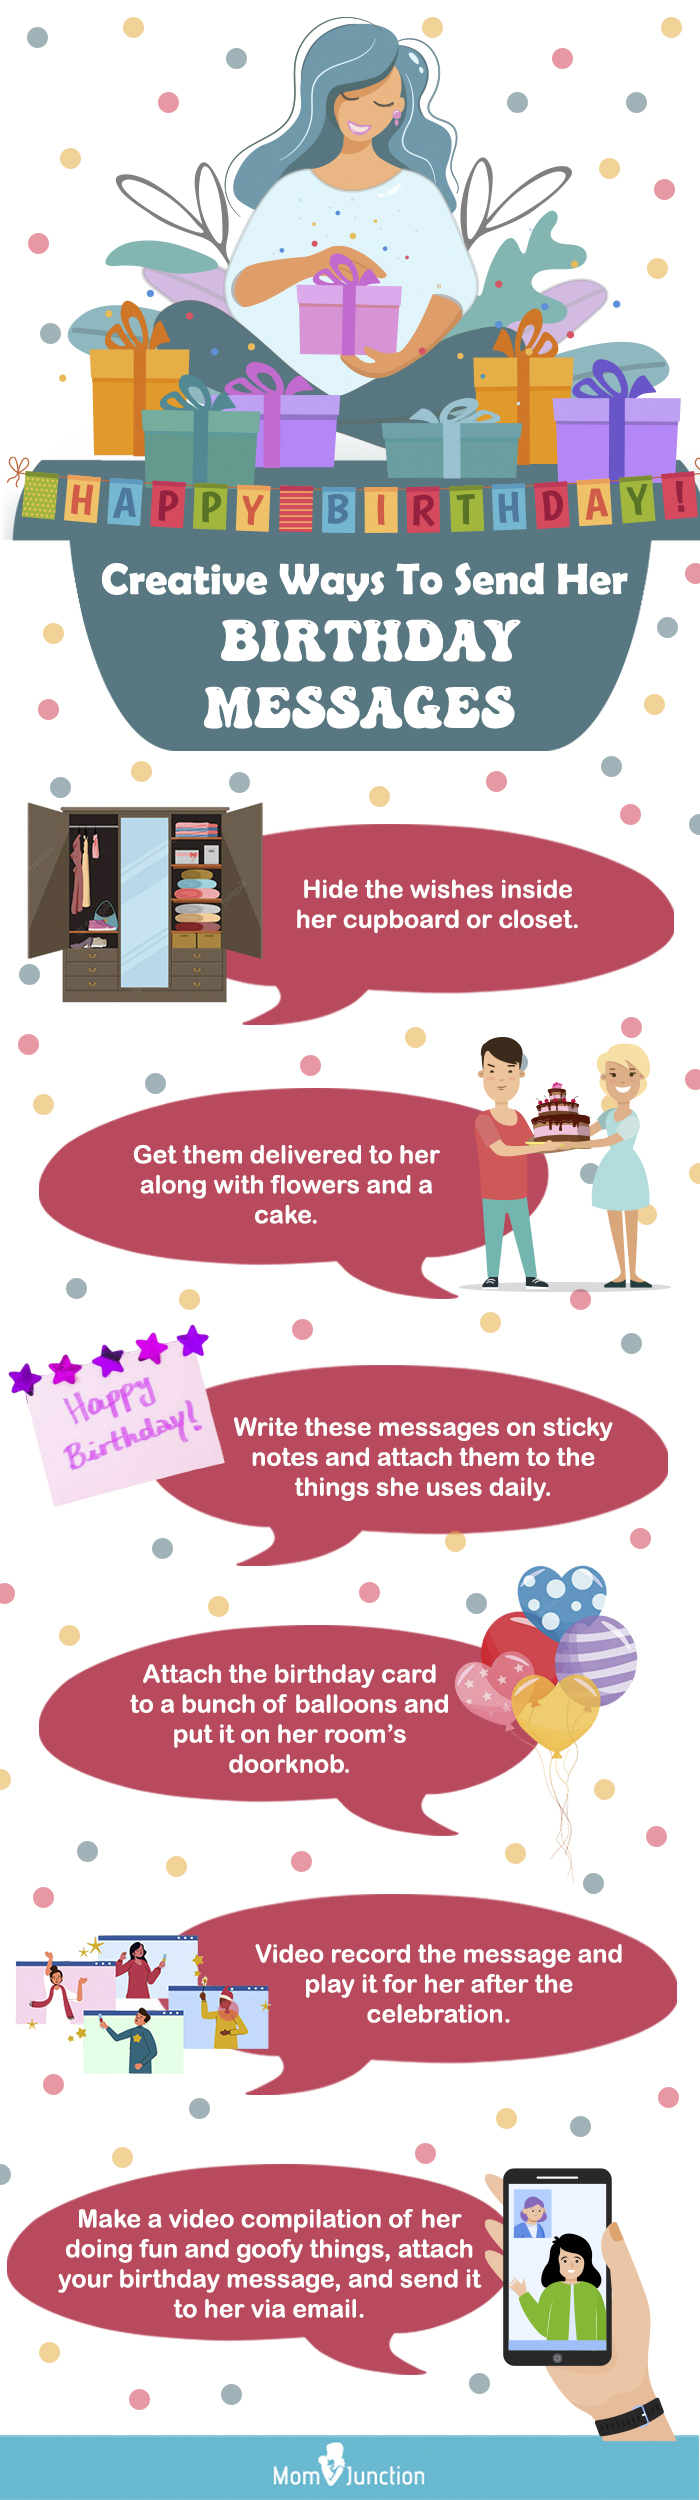 201 Romantic And Funny Birthday Wishes For Your Girlfriend